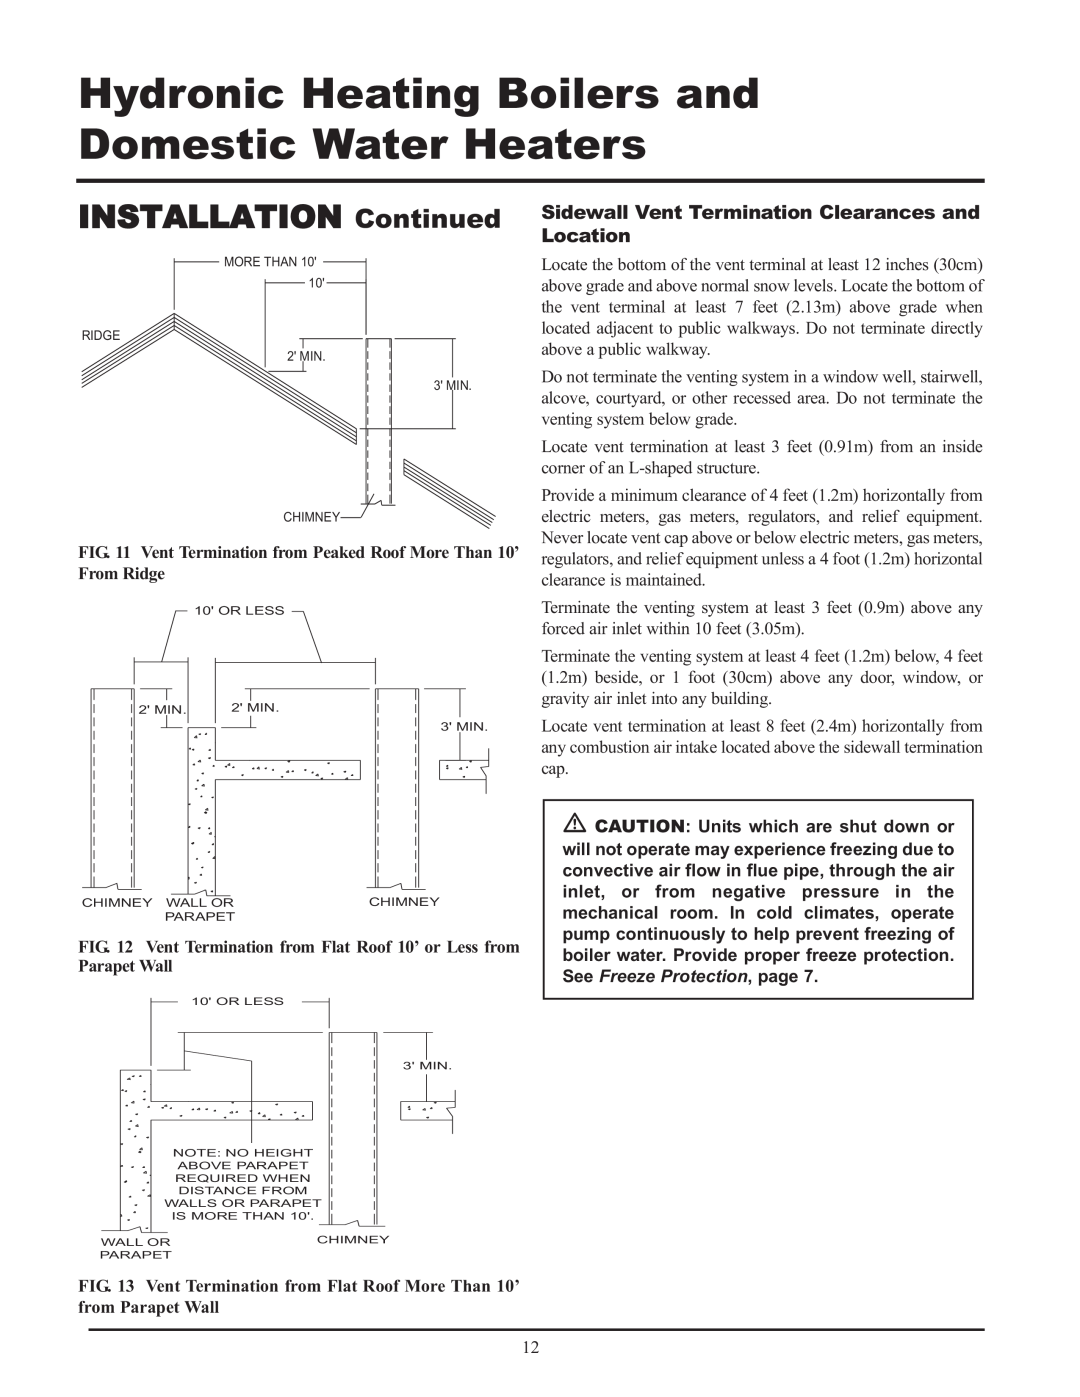 Lochinvar 999 - 750 Sidewall Vent Termination Clearances and Location, Hydronic Heating Boilers and Domestic Water Heaters 